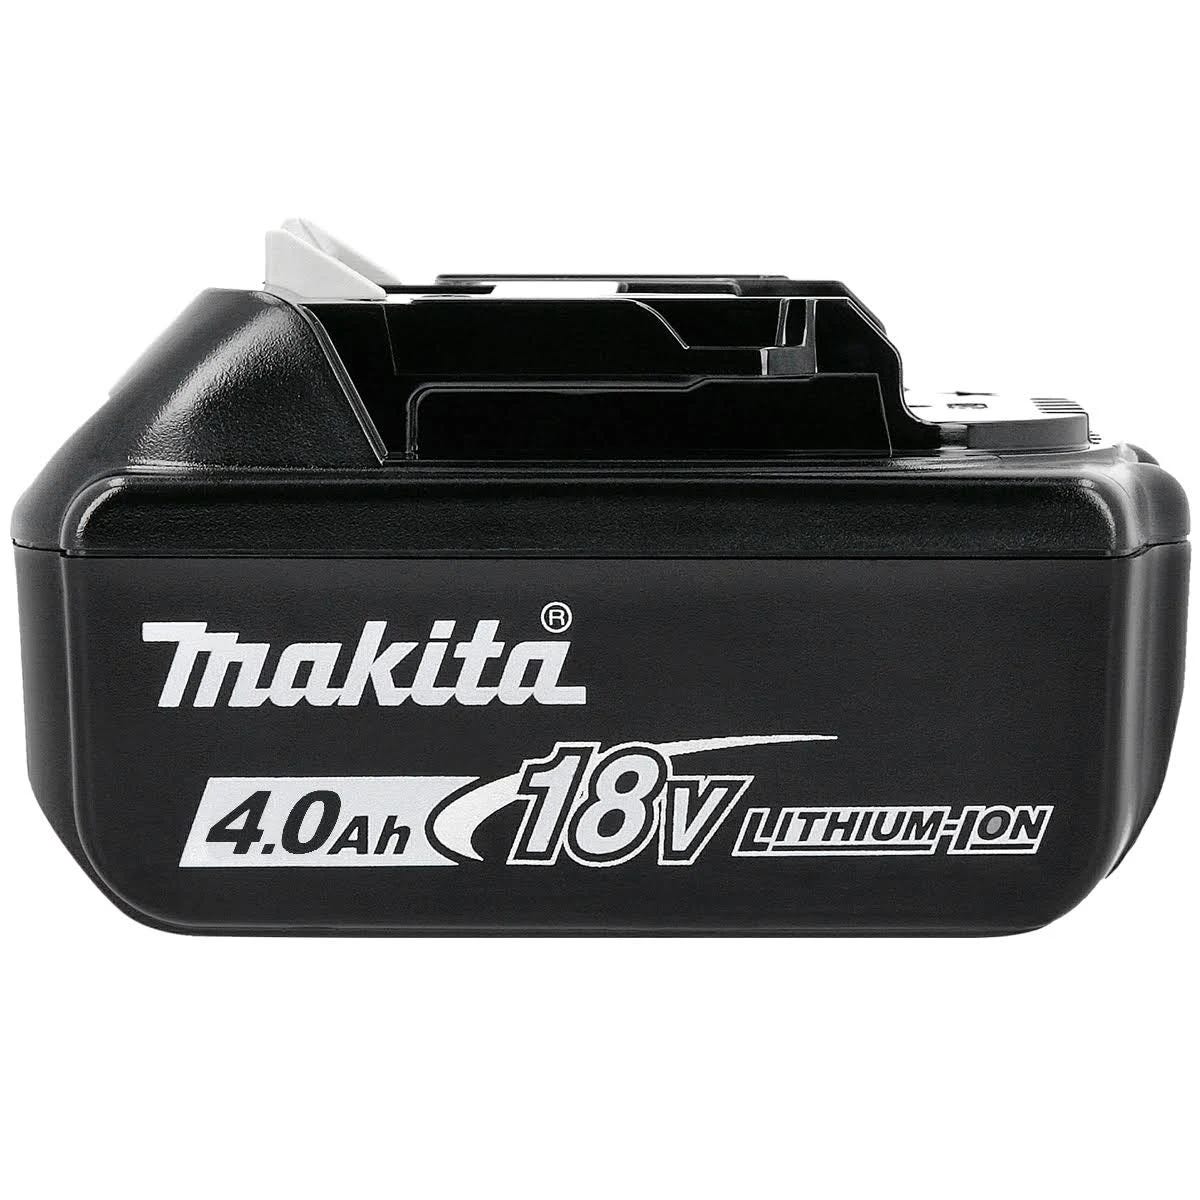 Makita 18V LXT 4.0Ah Lithium-Ion Battery for Compact Power Tools | Image